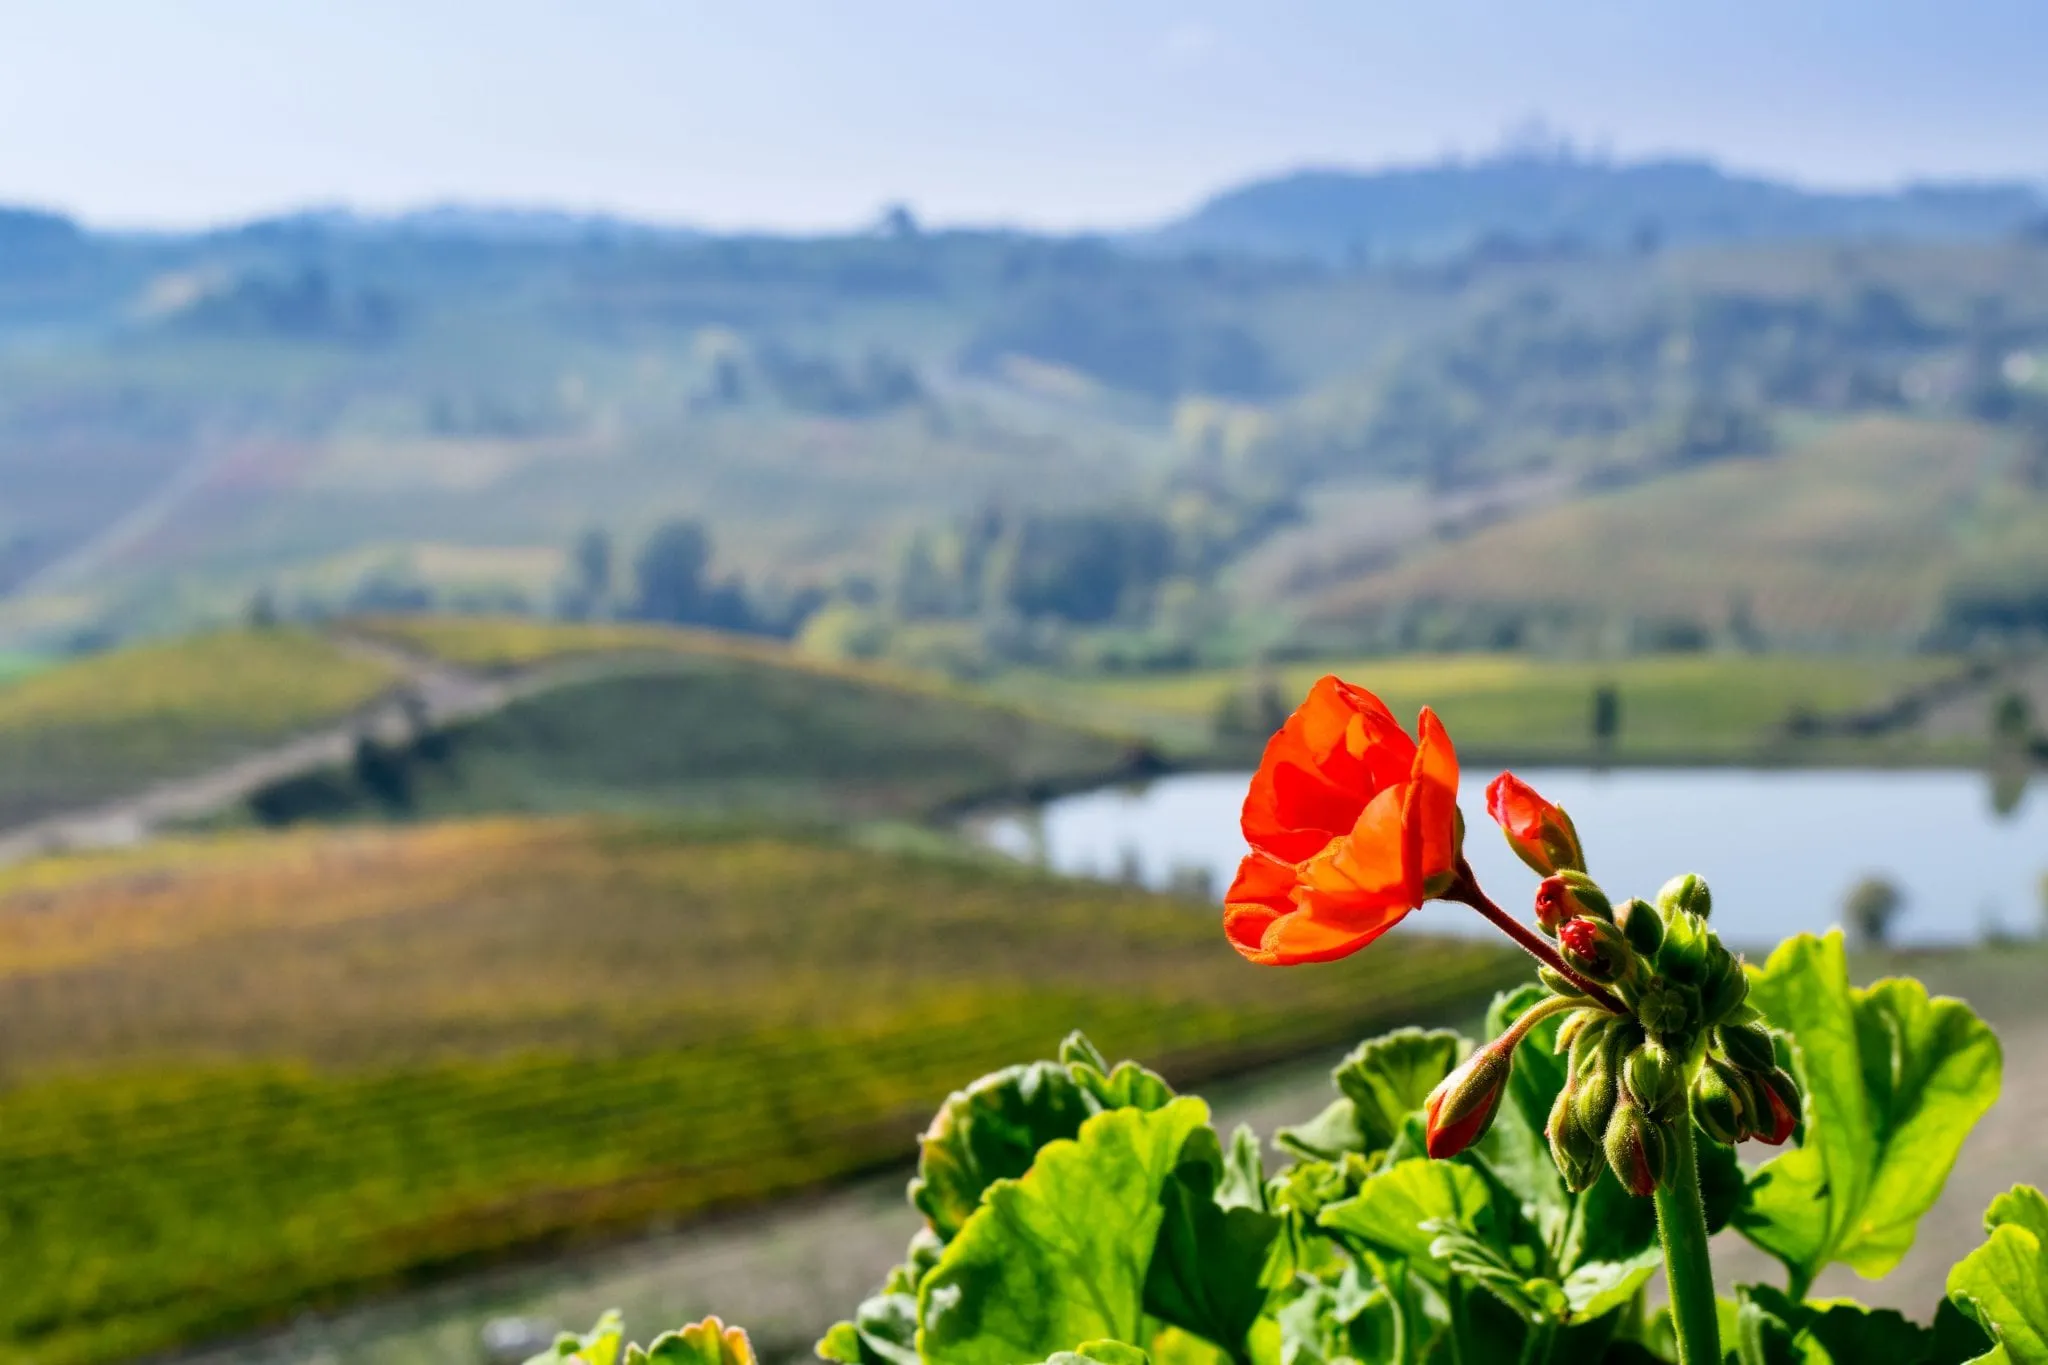 view of blooming red flower during fall in tuscany italy with san gimignano in the background, a wonderful stop during 3 days in tuscany